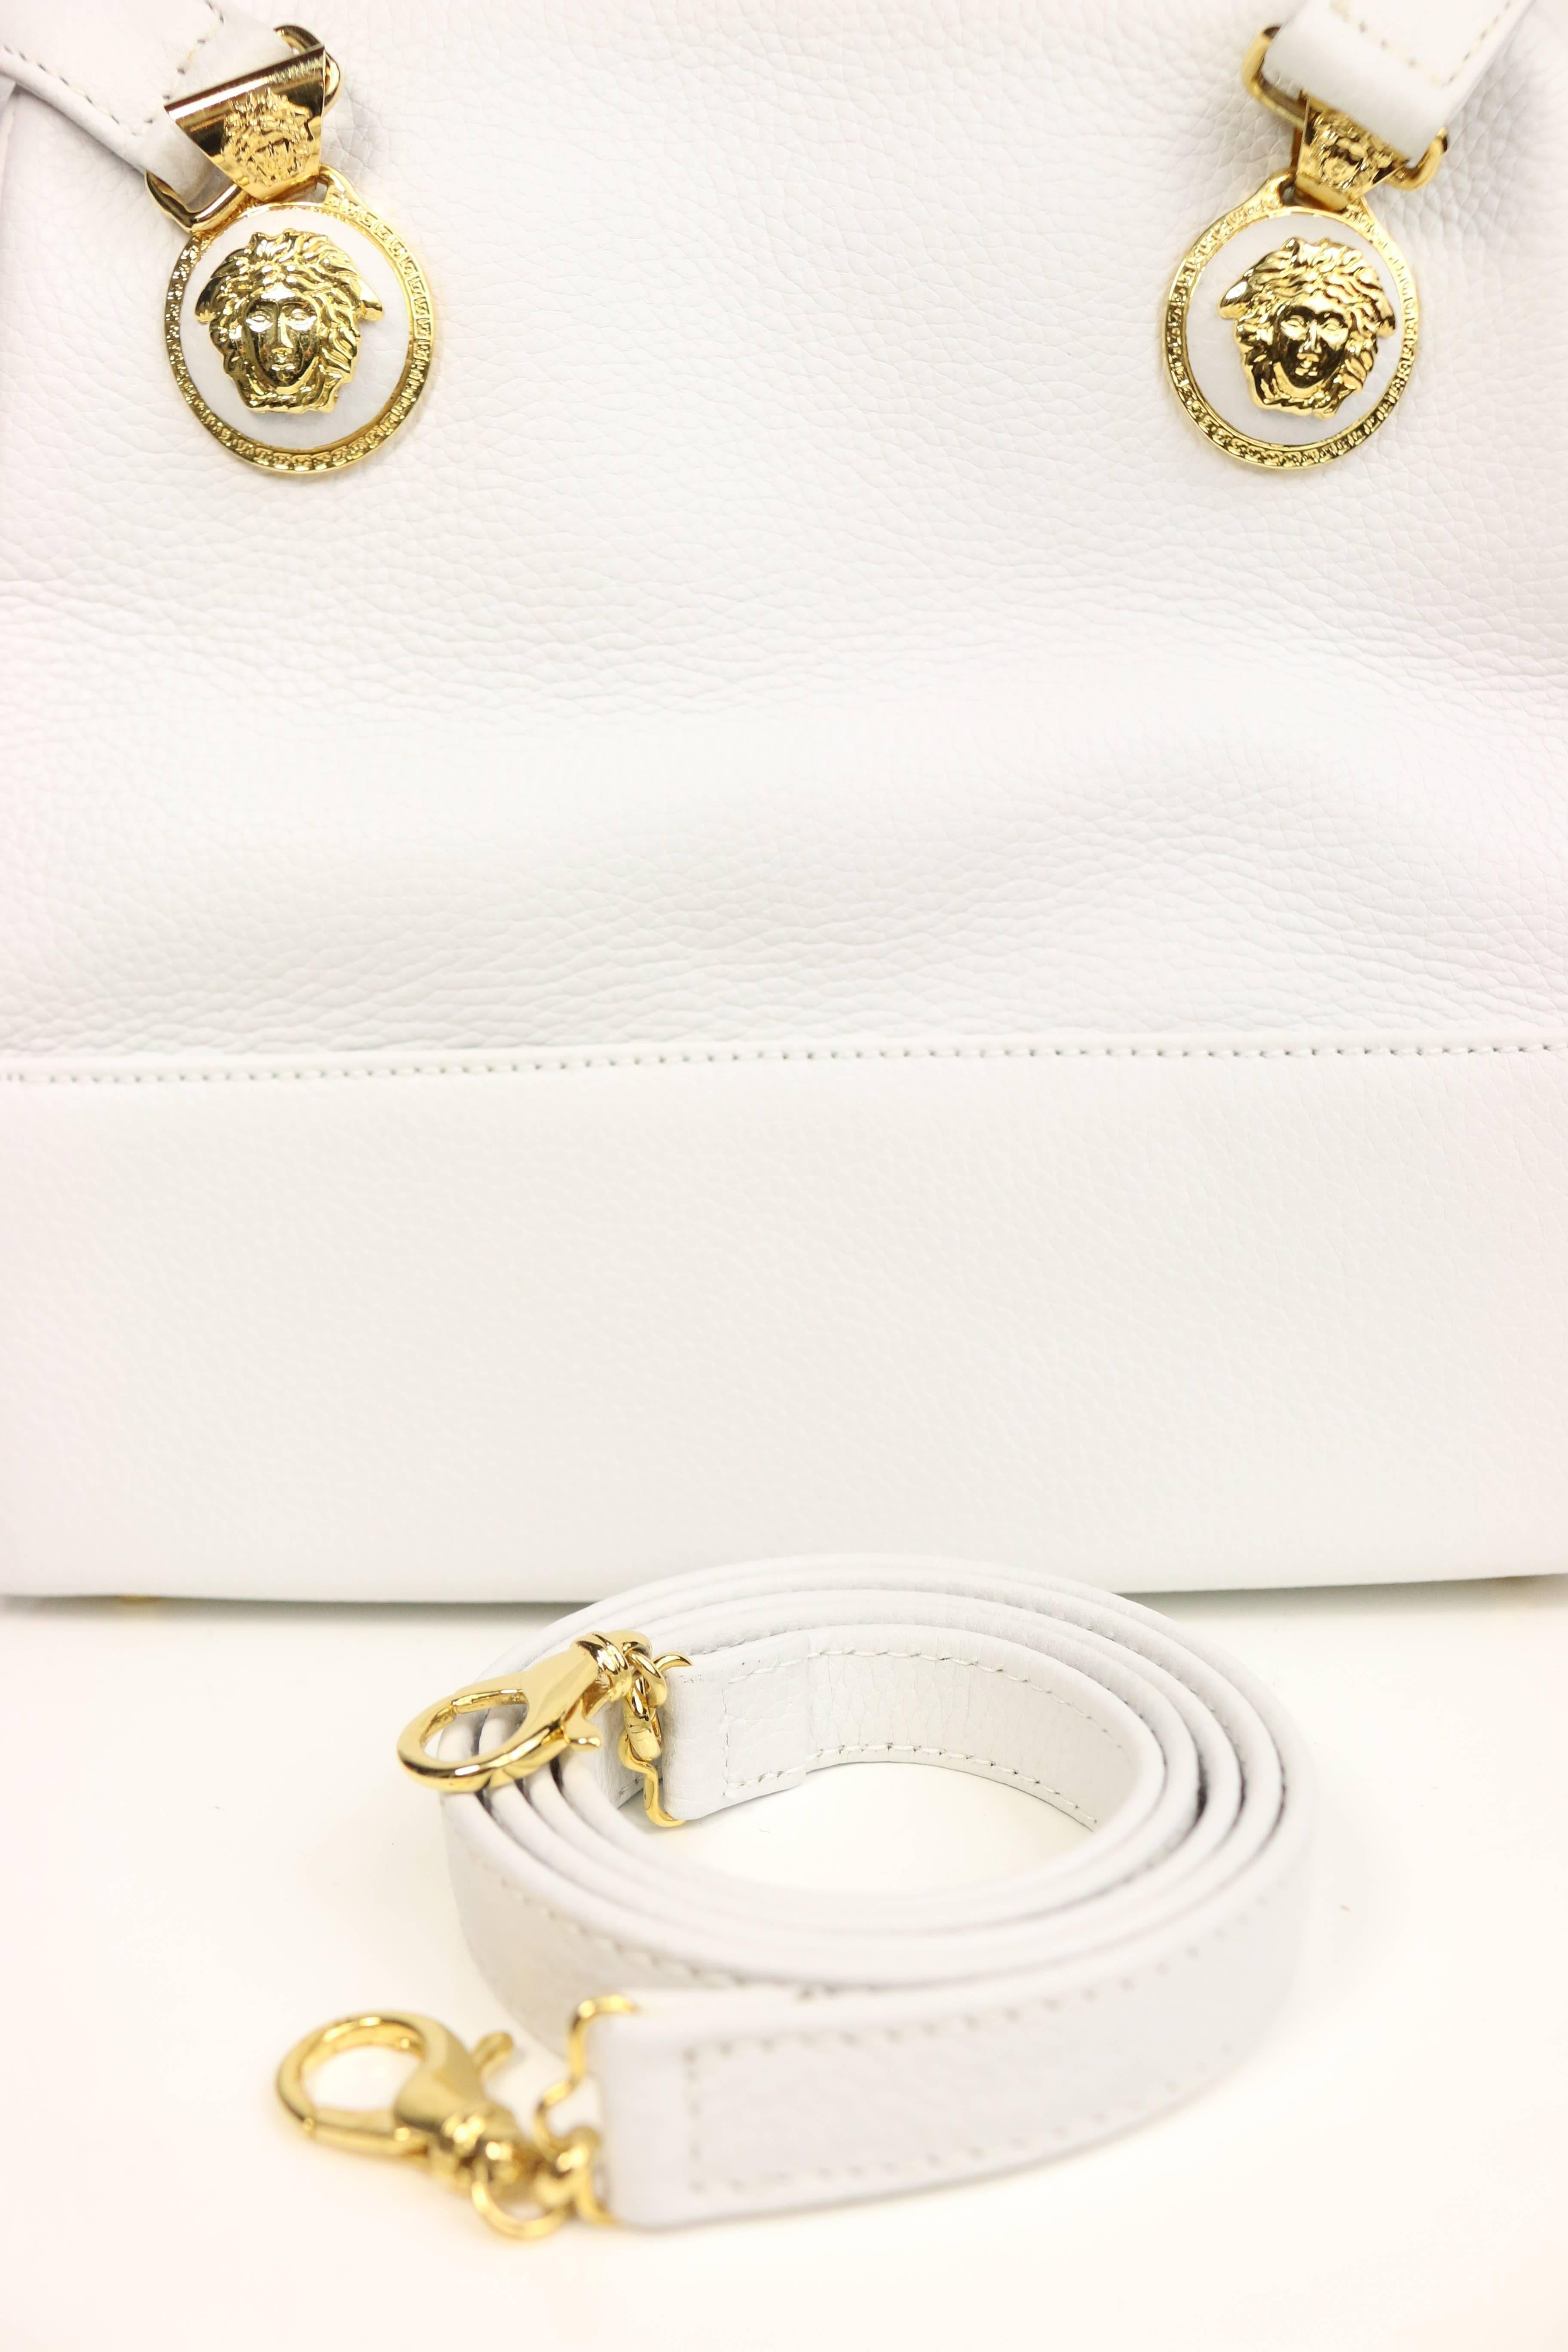 - Vintage 90s Gianni Versace Couture white leather Handbag. 

- Gold toned hardware Medusa zip closure. 

- Interior zip closure. 

- Five bottom gold toned hardware studs. 

- Height: 8 inches. Length: 8.5 inches. Width: 2.5 inches. Hand Drop: 8